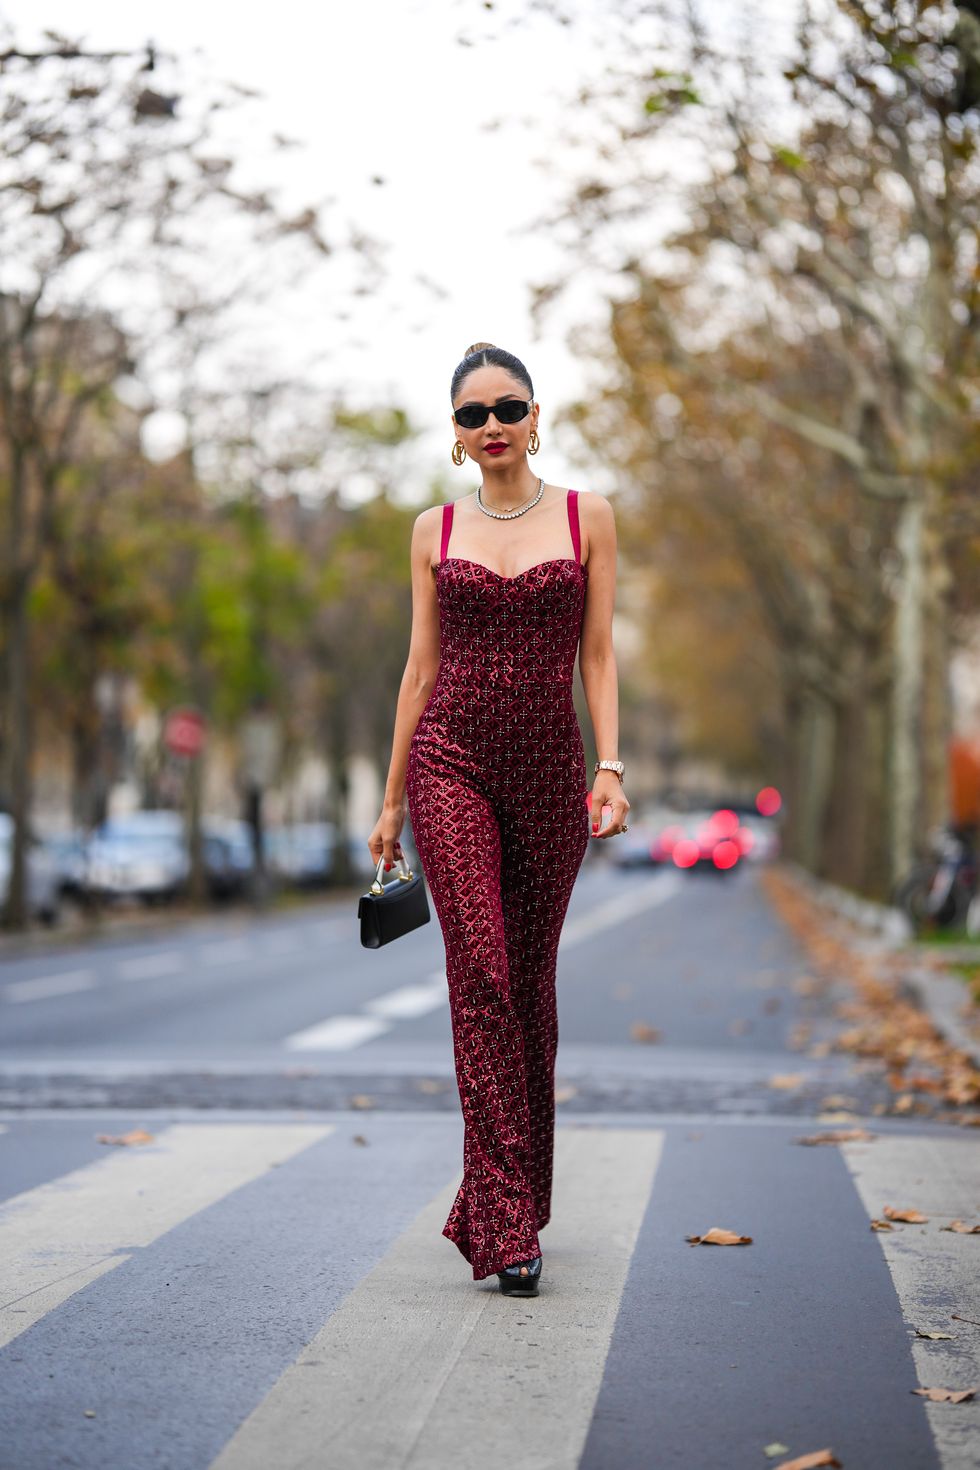 paris, france   november 14 patricia gloria contreras wears black sunglasses, gold earrings from louis vuitton, a gold chain necklace, a silver and rhinestones necklace, a burgundy velvet with red checkered embroidered sequins pattern  v neck  tank top  flared jumpsuit, a pink gold watch from rolex, a large gold ring, a black shiny leather handbag from alzuarr, black shiny leather pumps heels shoes with small open toe cap, during a street style fashion photo session, on november 14, 2021 in paris, france photo by edward berthelotgetty images